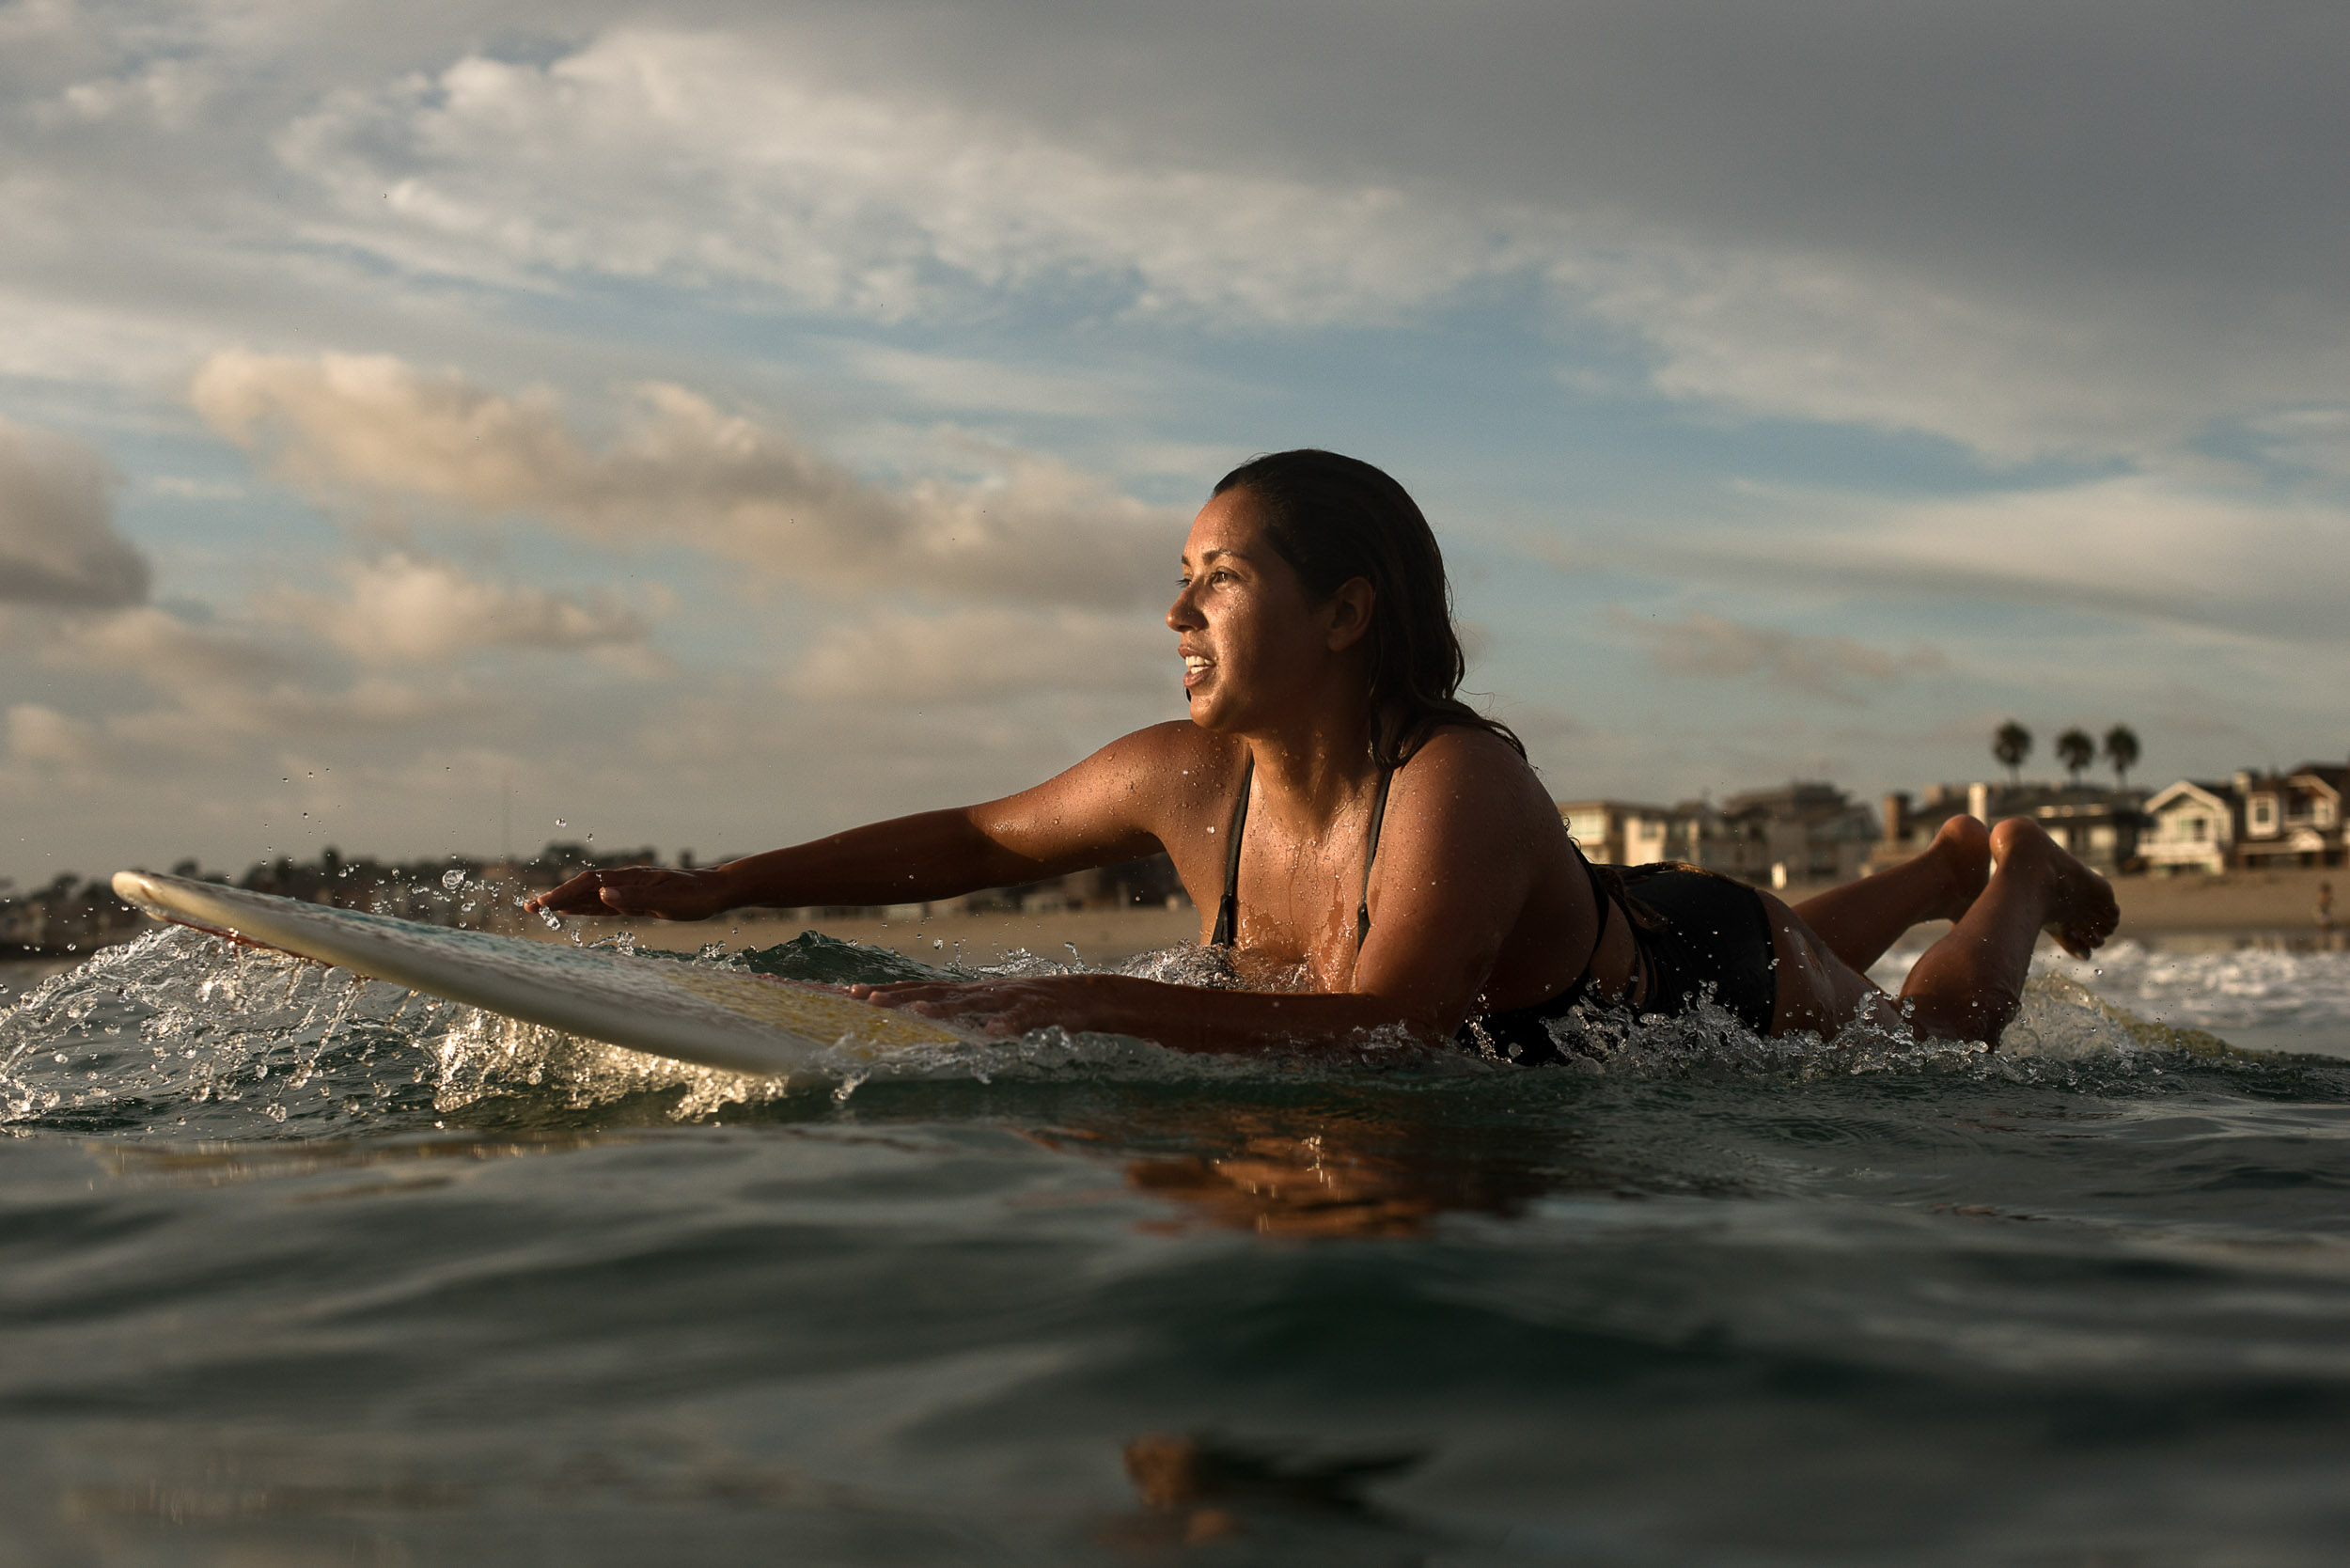 A professional female surfer paddles out in Newport Beach, Calif.